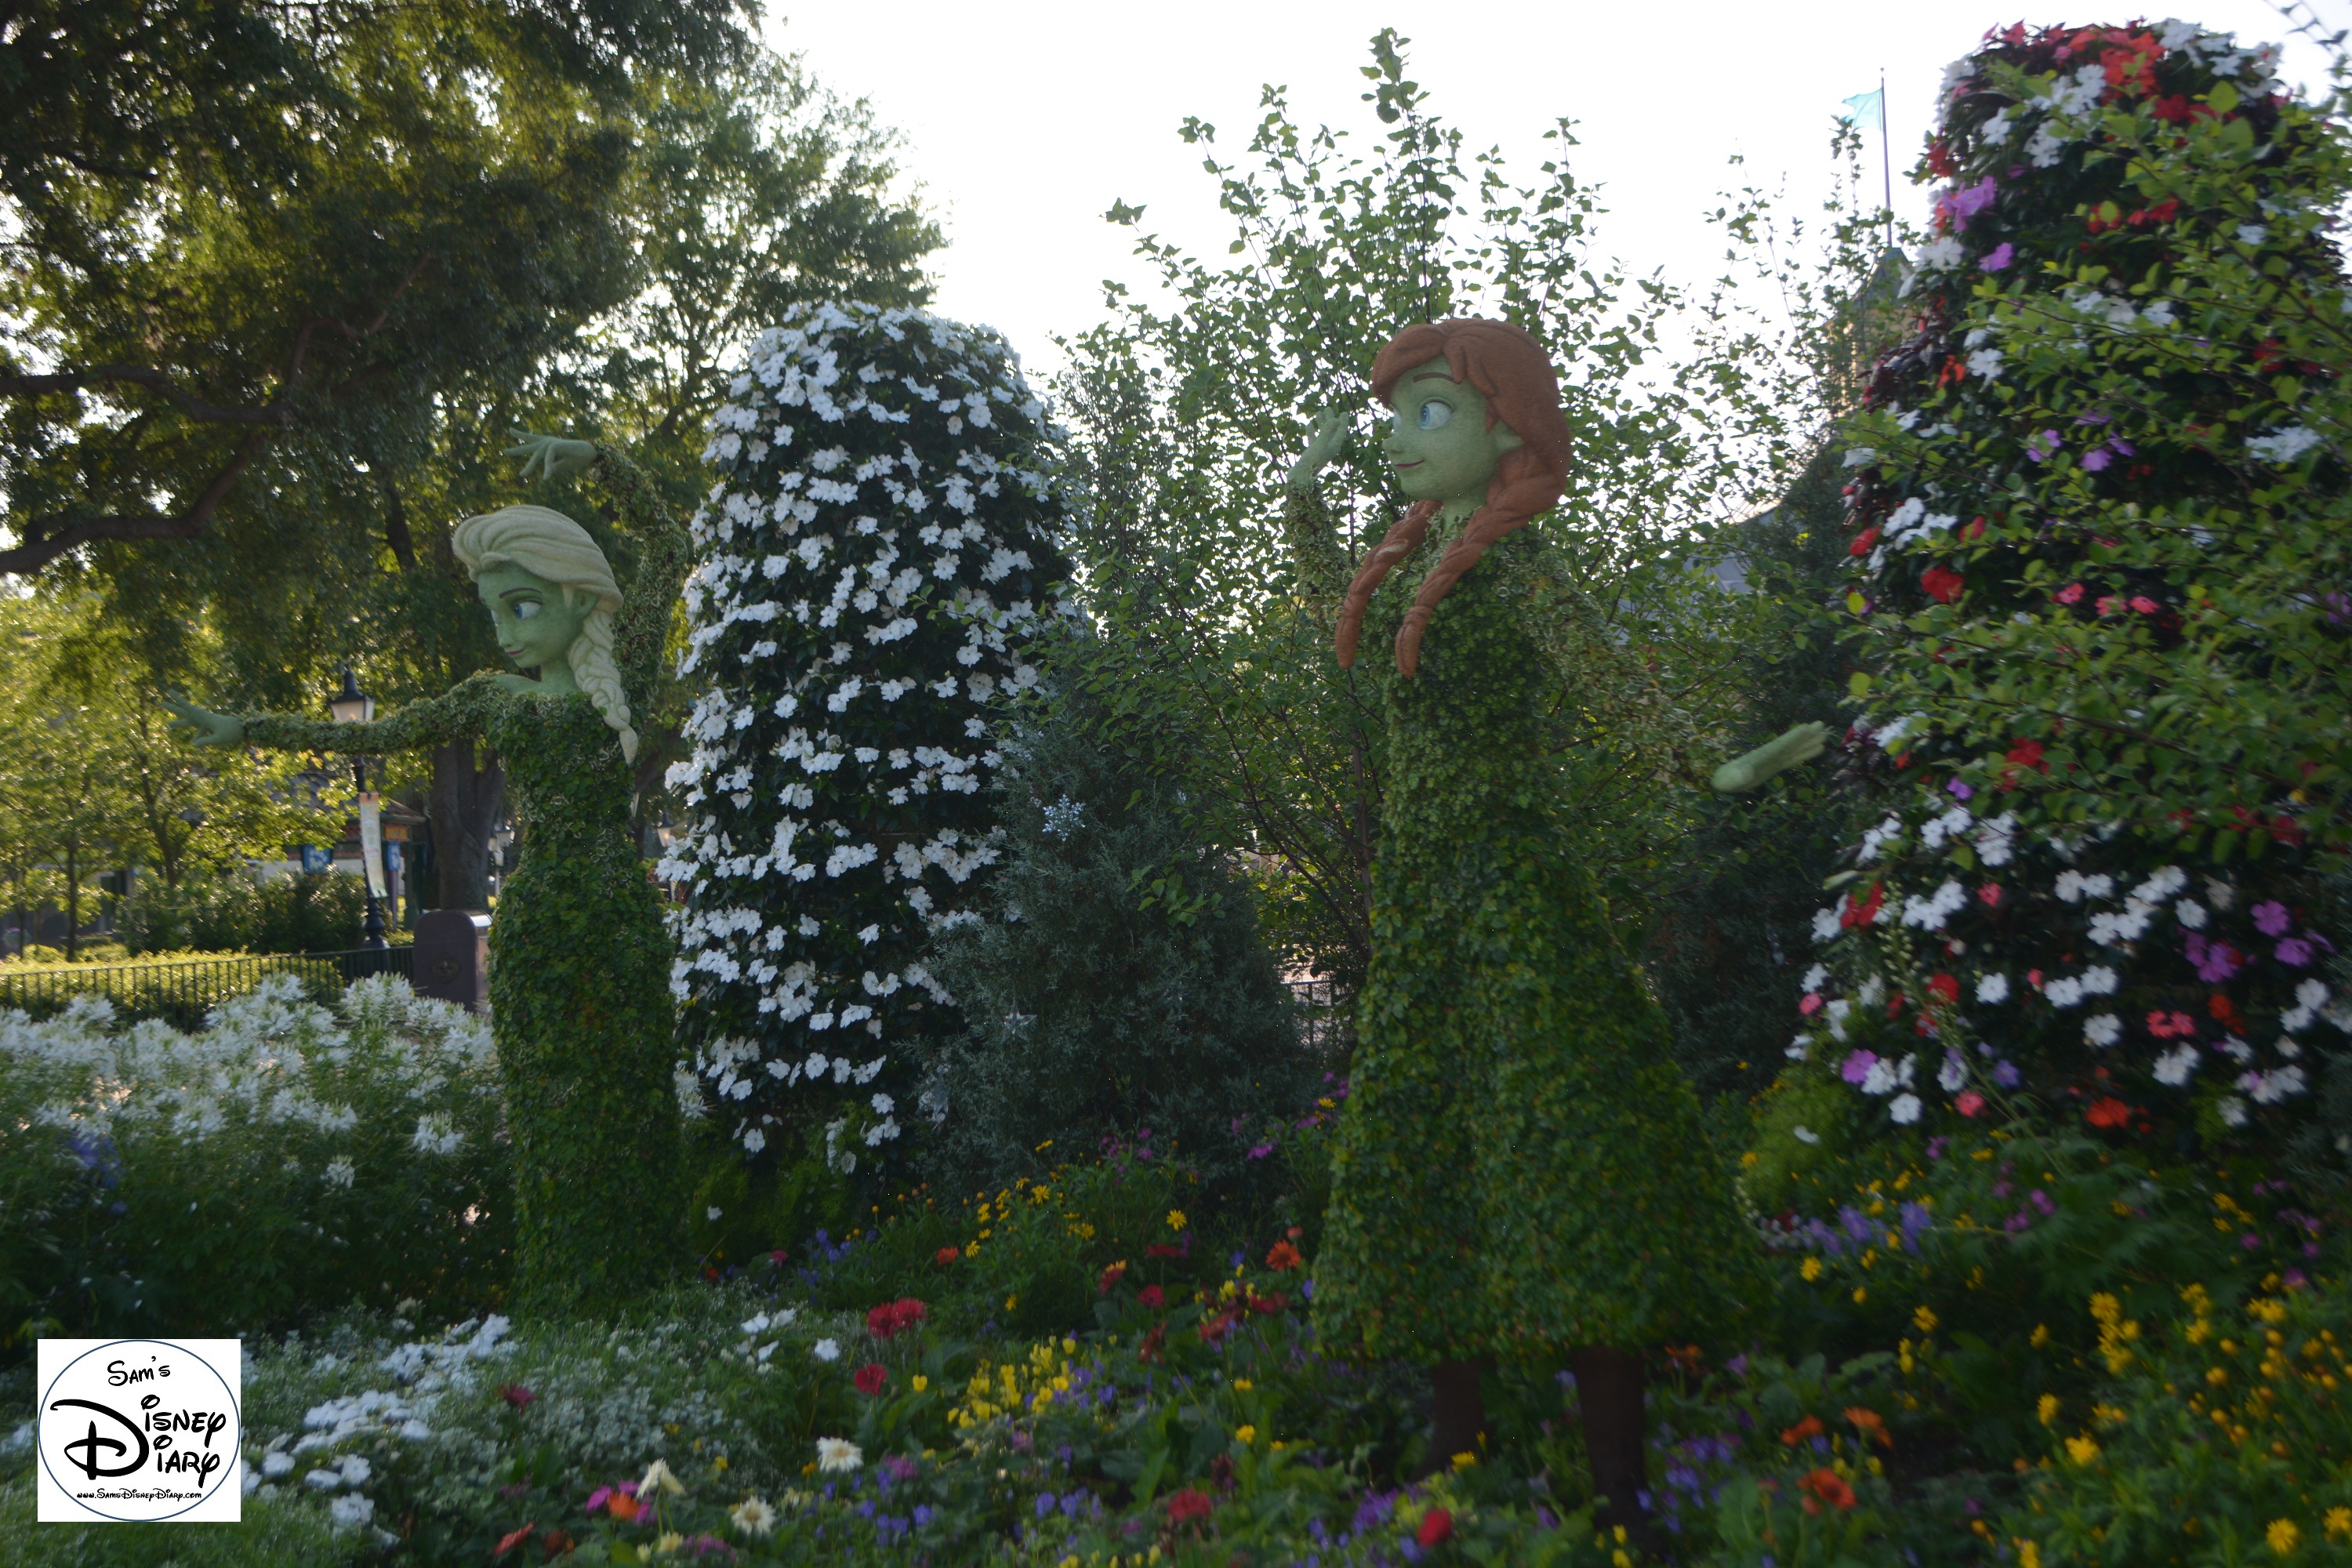 Epcot Flower and Garden Festival - Anna and Elsa Topiaries